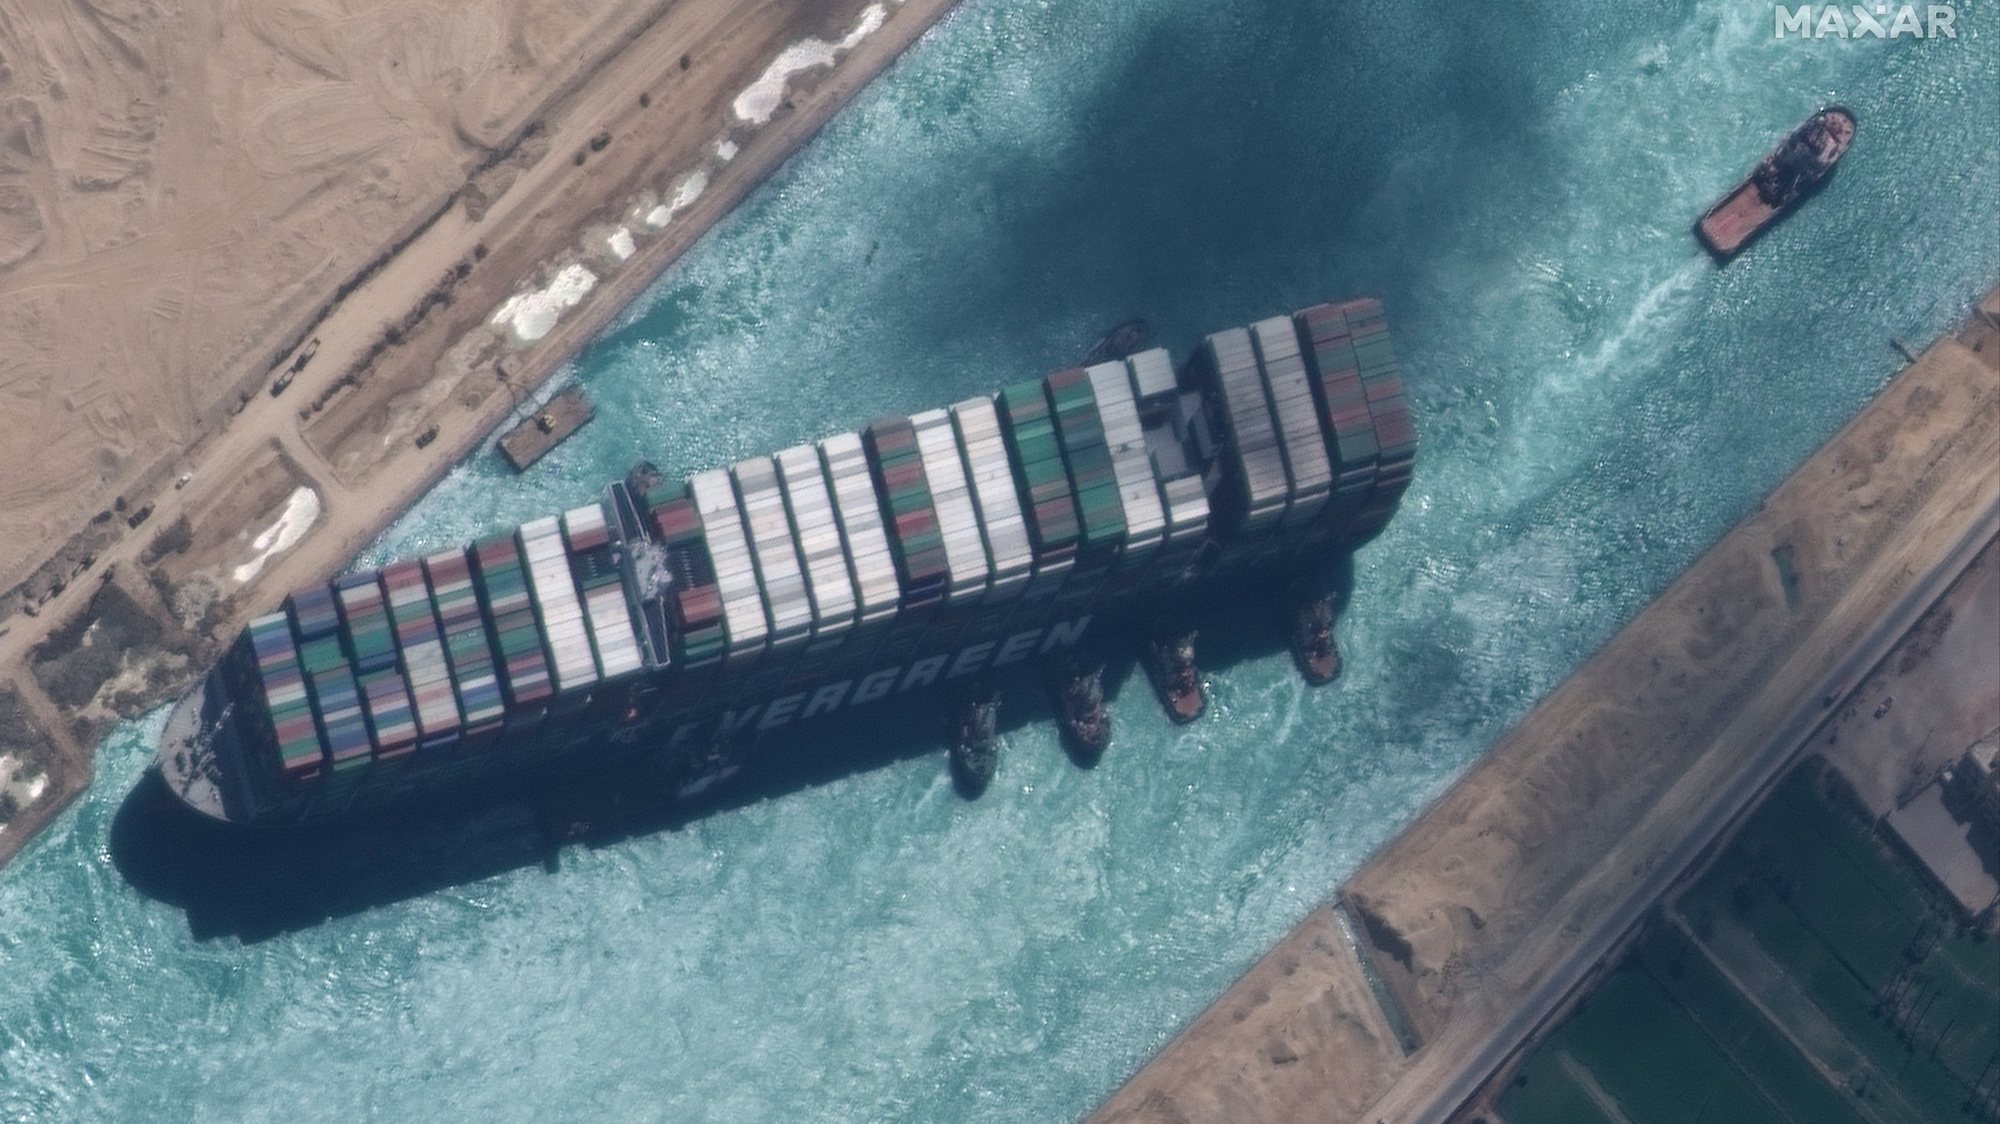 epa09105214 A handout satellite image made available by MAXAR Technologies shows , the Ever Given container ship after it has been moved away from the eastern bank of the canal and tugboats trying to reposition the ship, in the Suez Canal, Egypt, 29 March 2021. The head of the Suez Canal Authority announced on 29 March that the large container ship, which ran aground in the Suez Canal on 23 March, is now free floating after responding to the pulling maneuvers.  EPA/MAXAR TECHNOLOGIES HANDOUT MANDATORY CREDIT: SATELLITE IMAGE 2020 MAXAR TECHNOLOGIES -- the watermark may not be removed/cropped -- HANDOUT EDITORIAL USE ONLY/NO SALES HANDOUT EDITORIAL USE ONLY/NO SALES